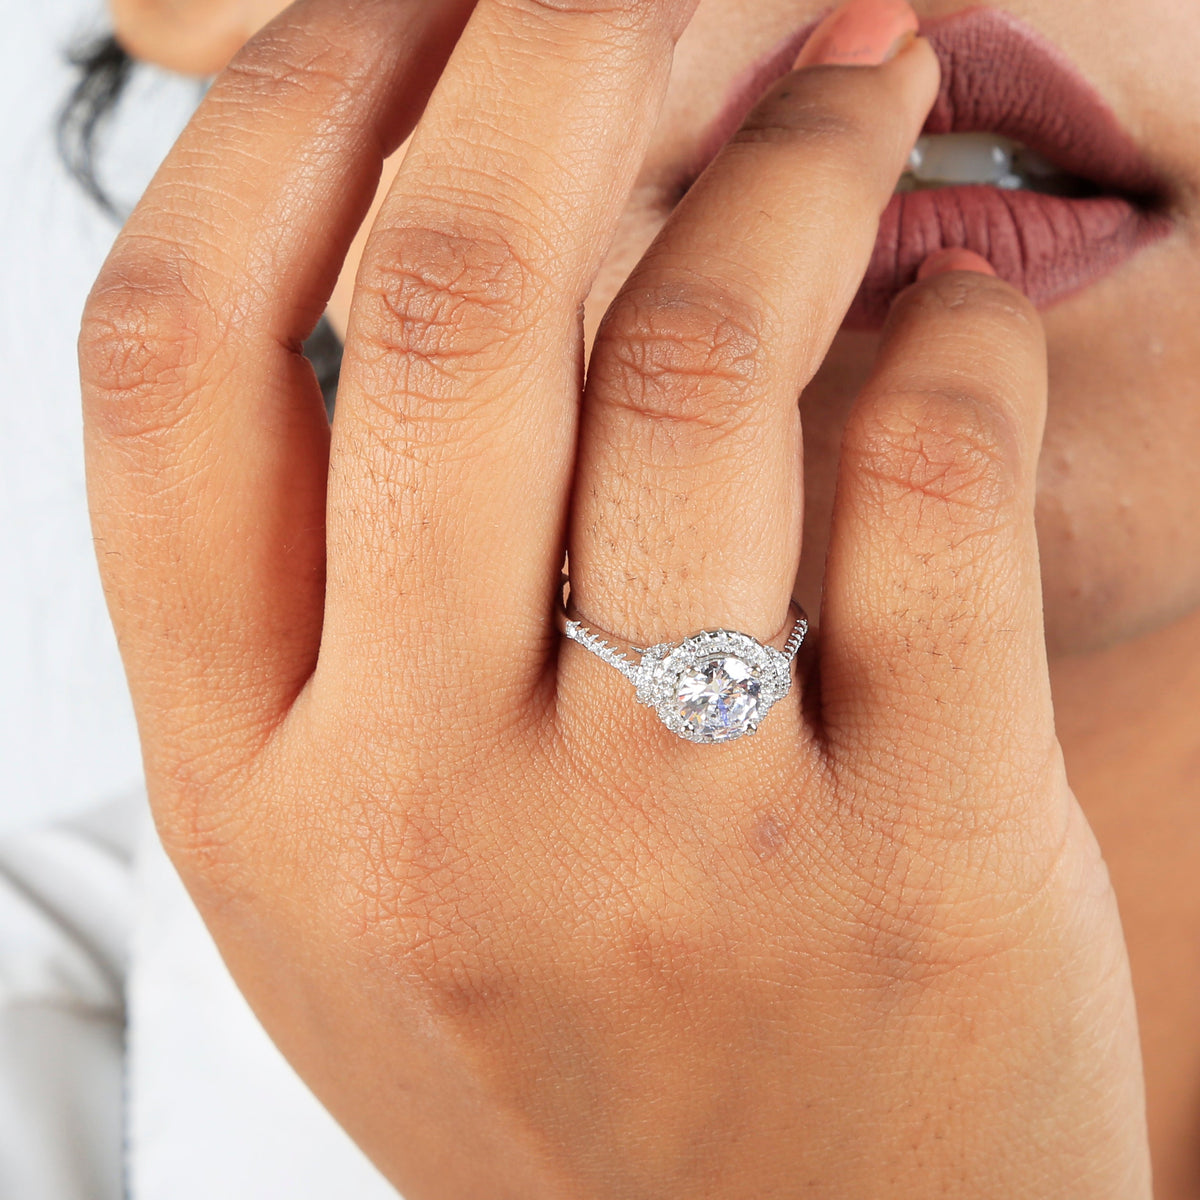 The Halo and Cz Garland Solitaire Ring